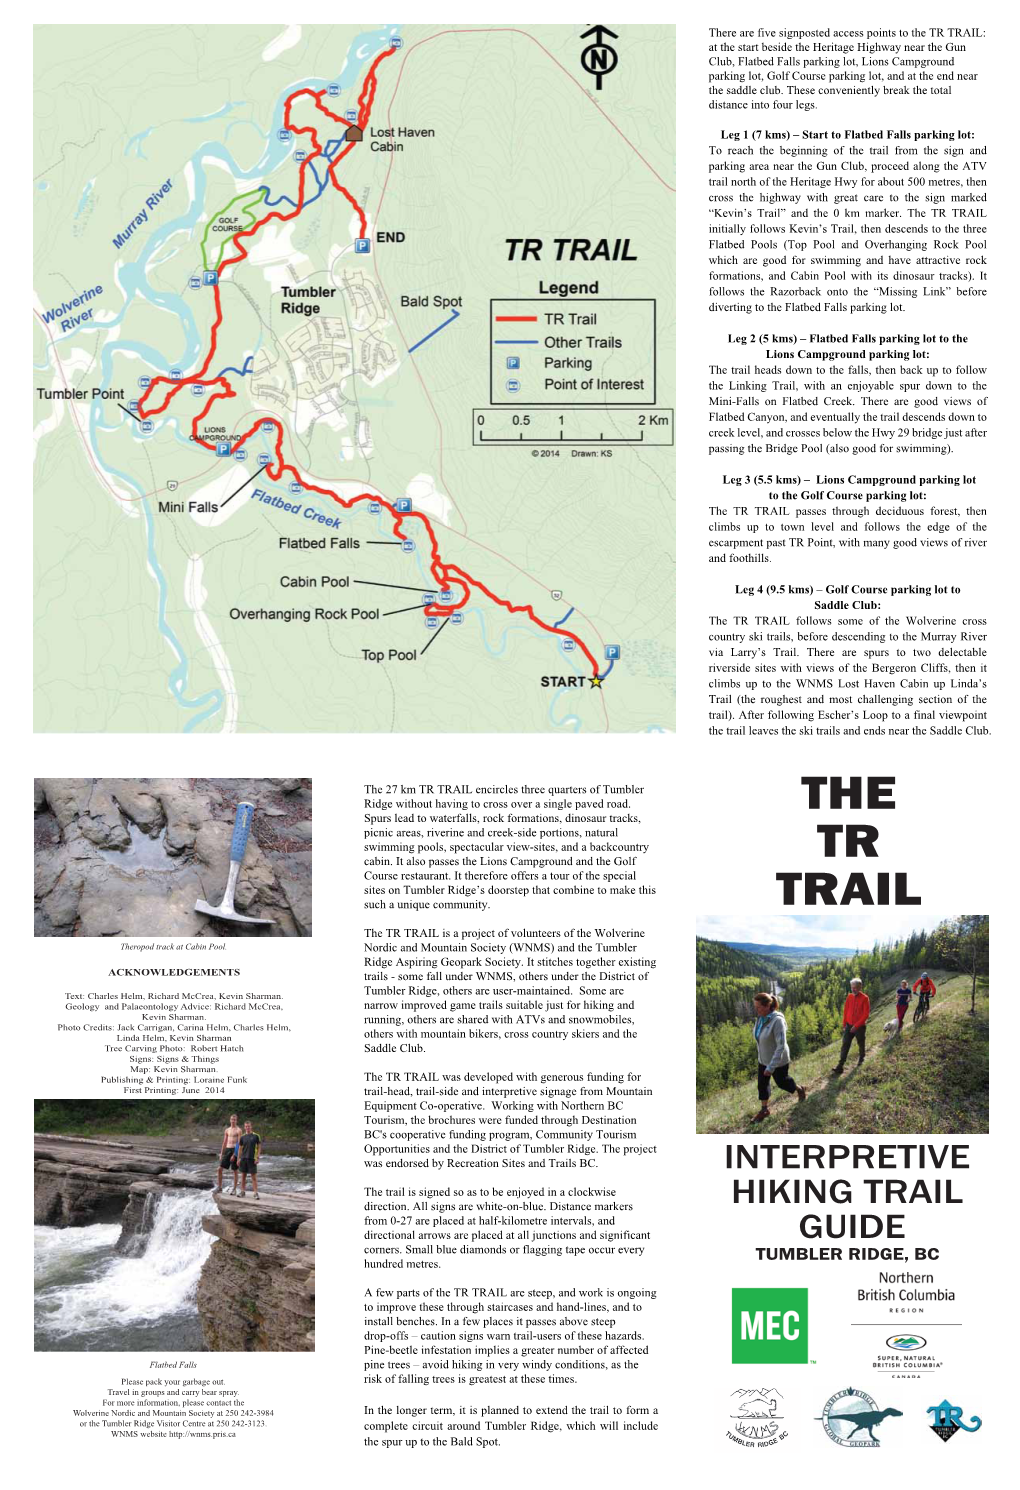 The Tr Trail